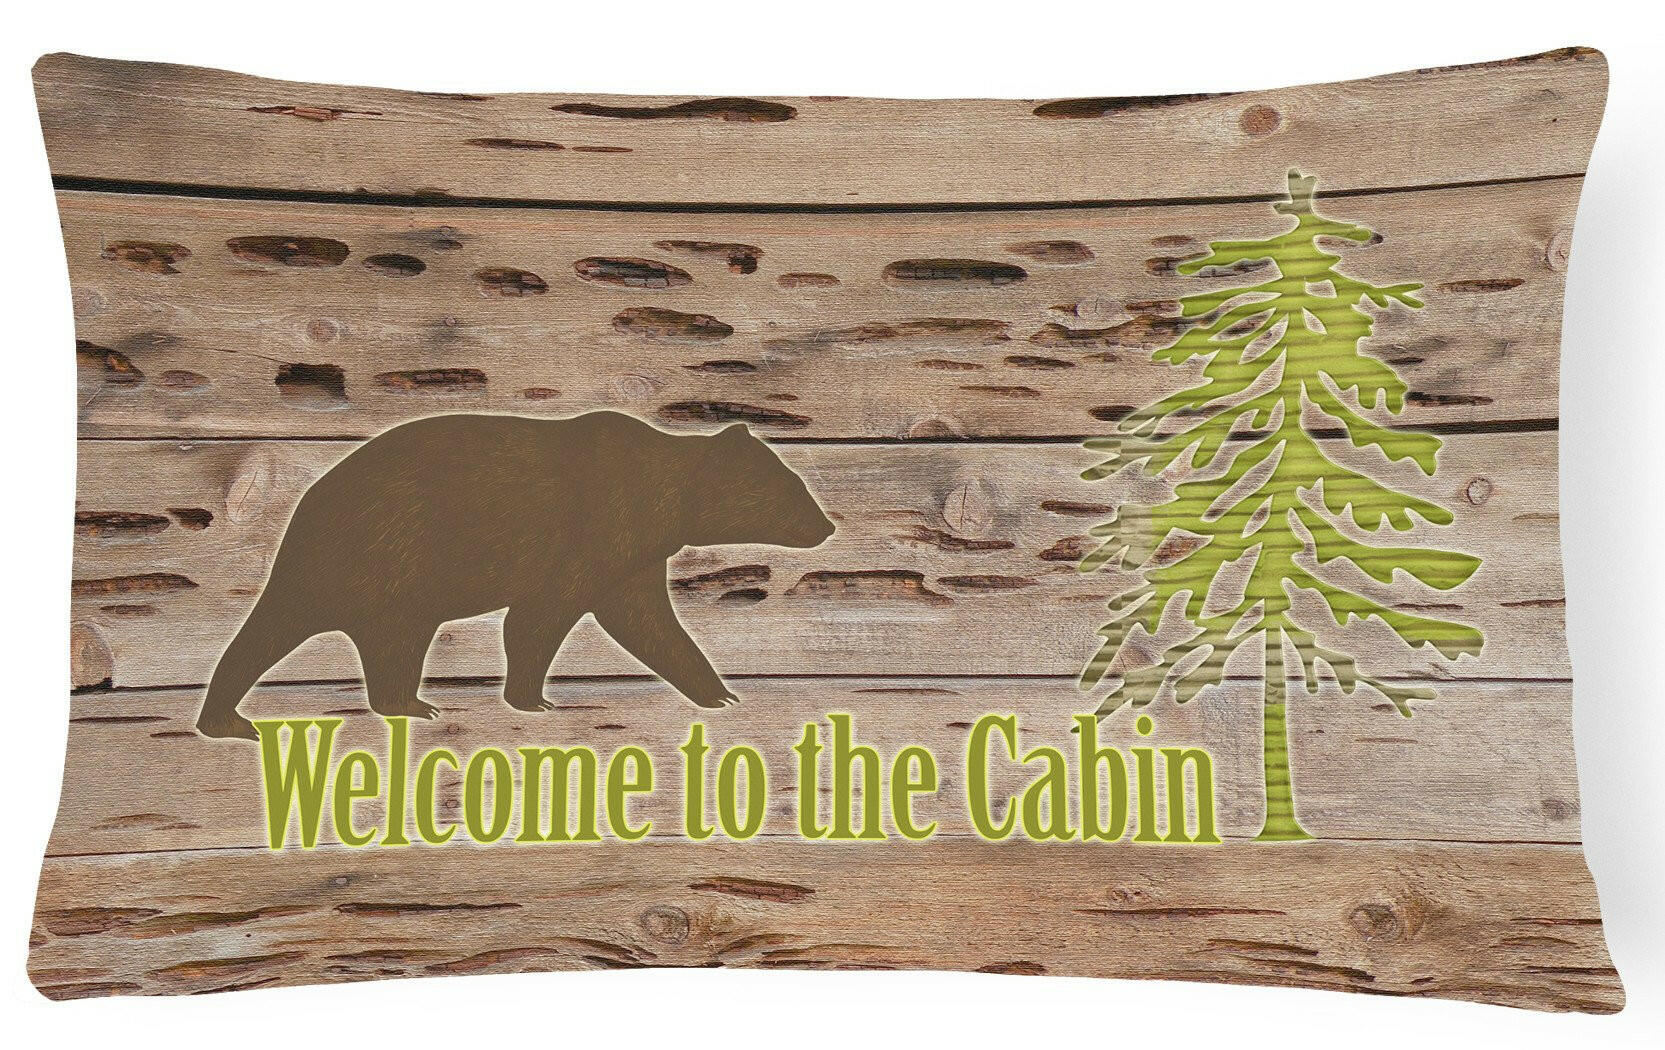 Welcome to the Cabin   Canvas Fabric Decorative Pillow SB3081PW1216 by Caroline's Treasures